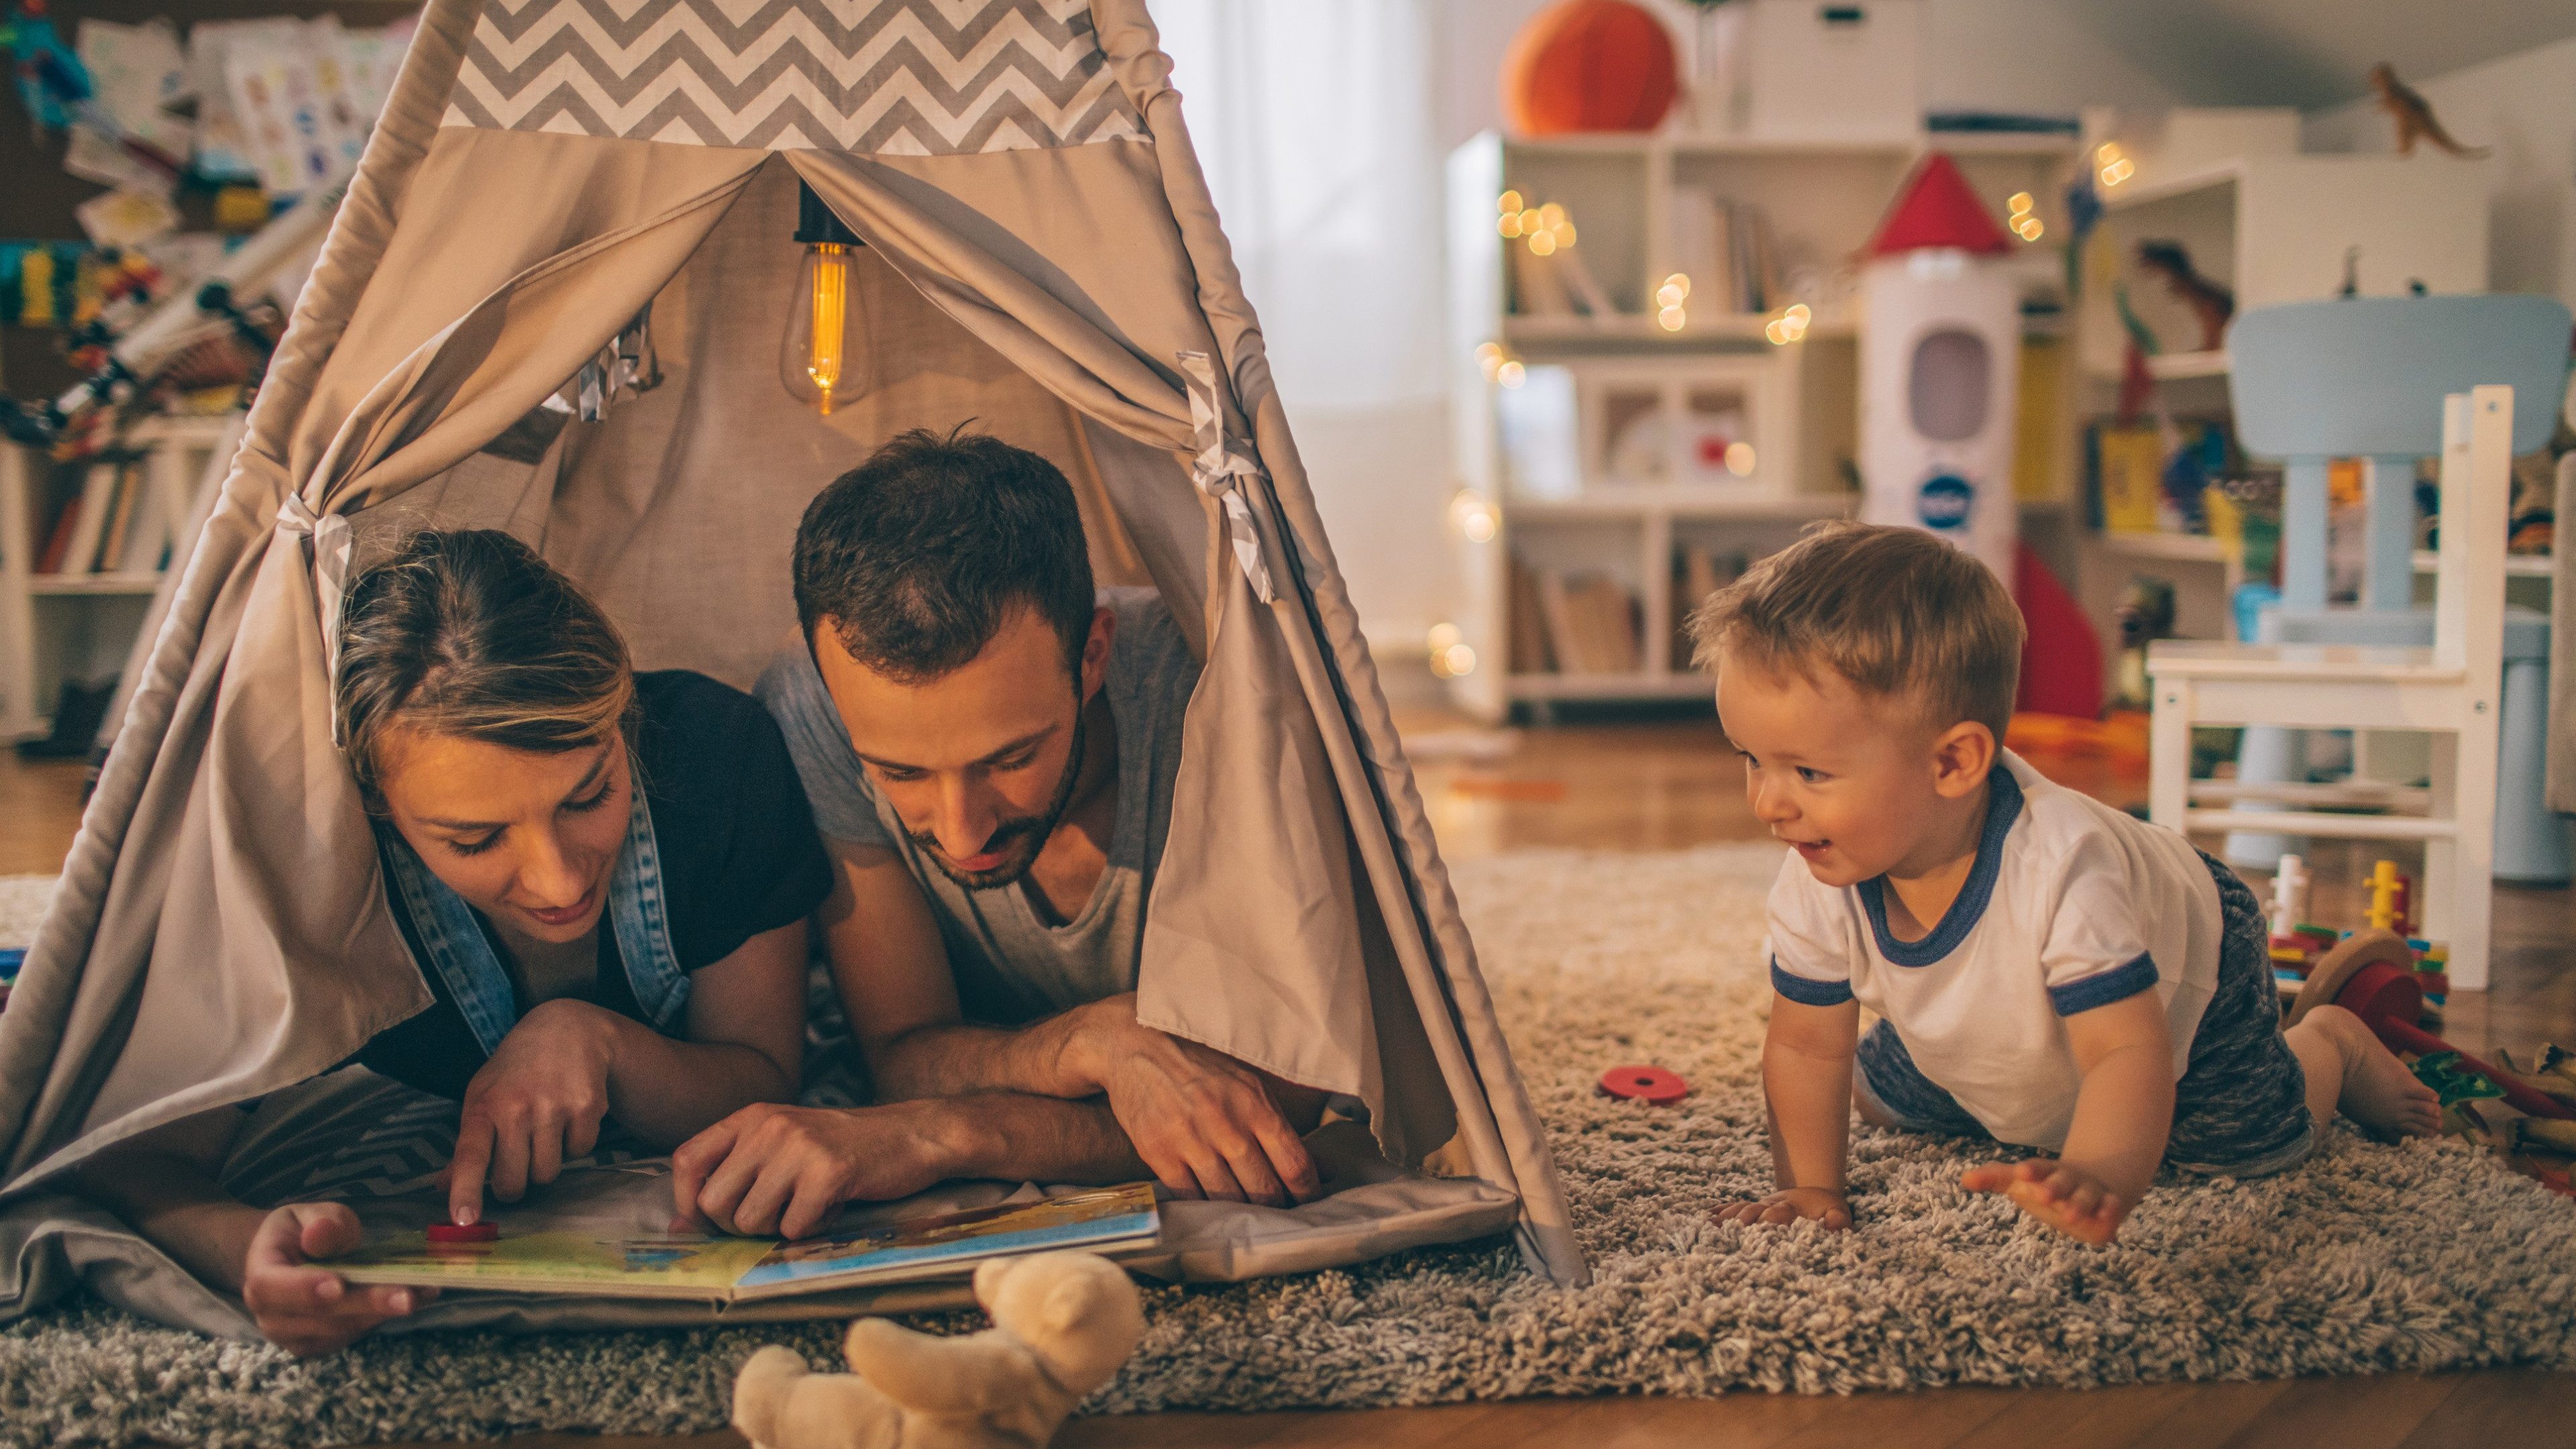 Photo of a young family with one child, spending time together indoors, playing 'Indians and cowboys' in their boy's wigwam